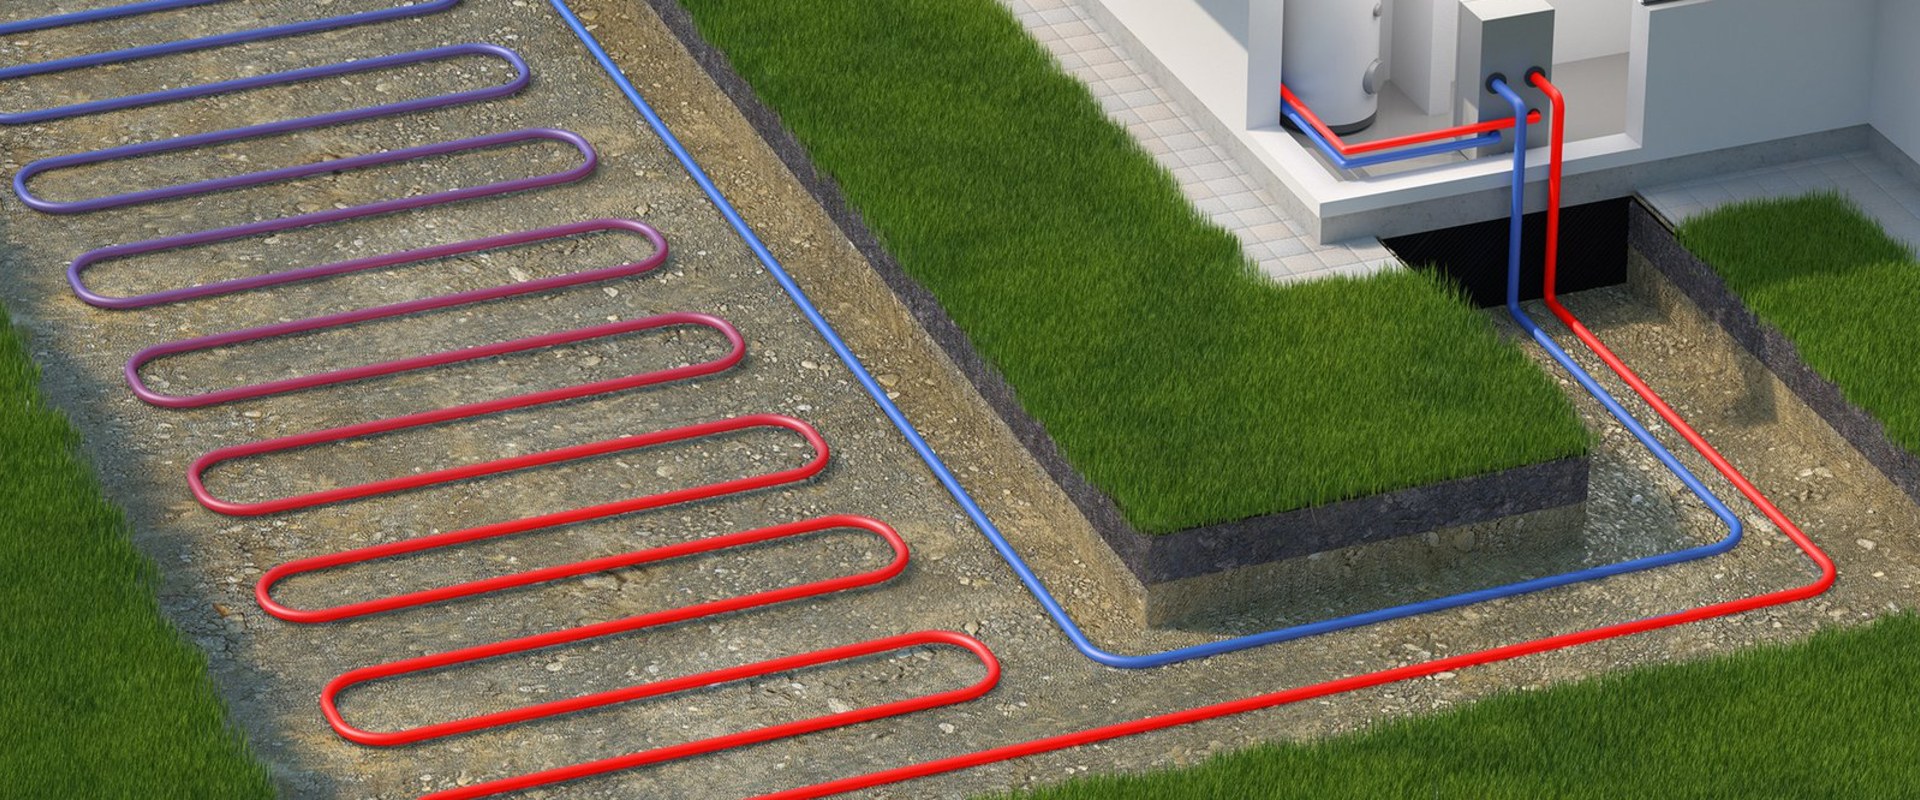 How Does Geothermal Heating Work In The Winter